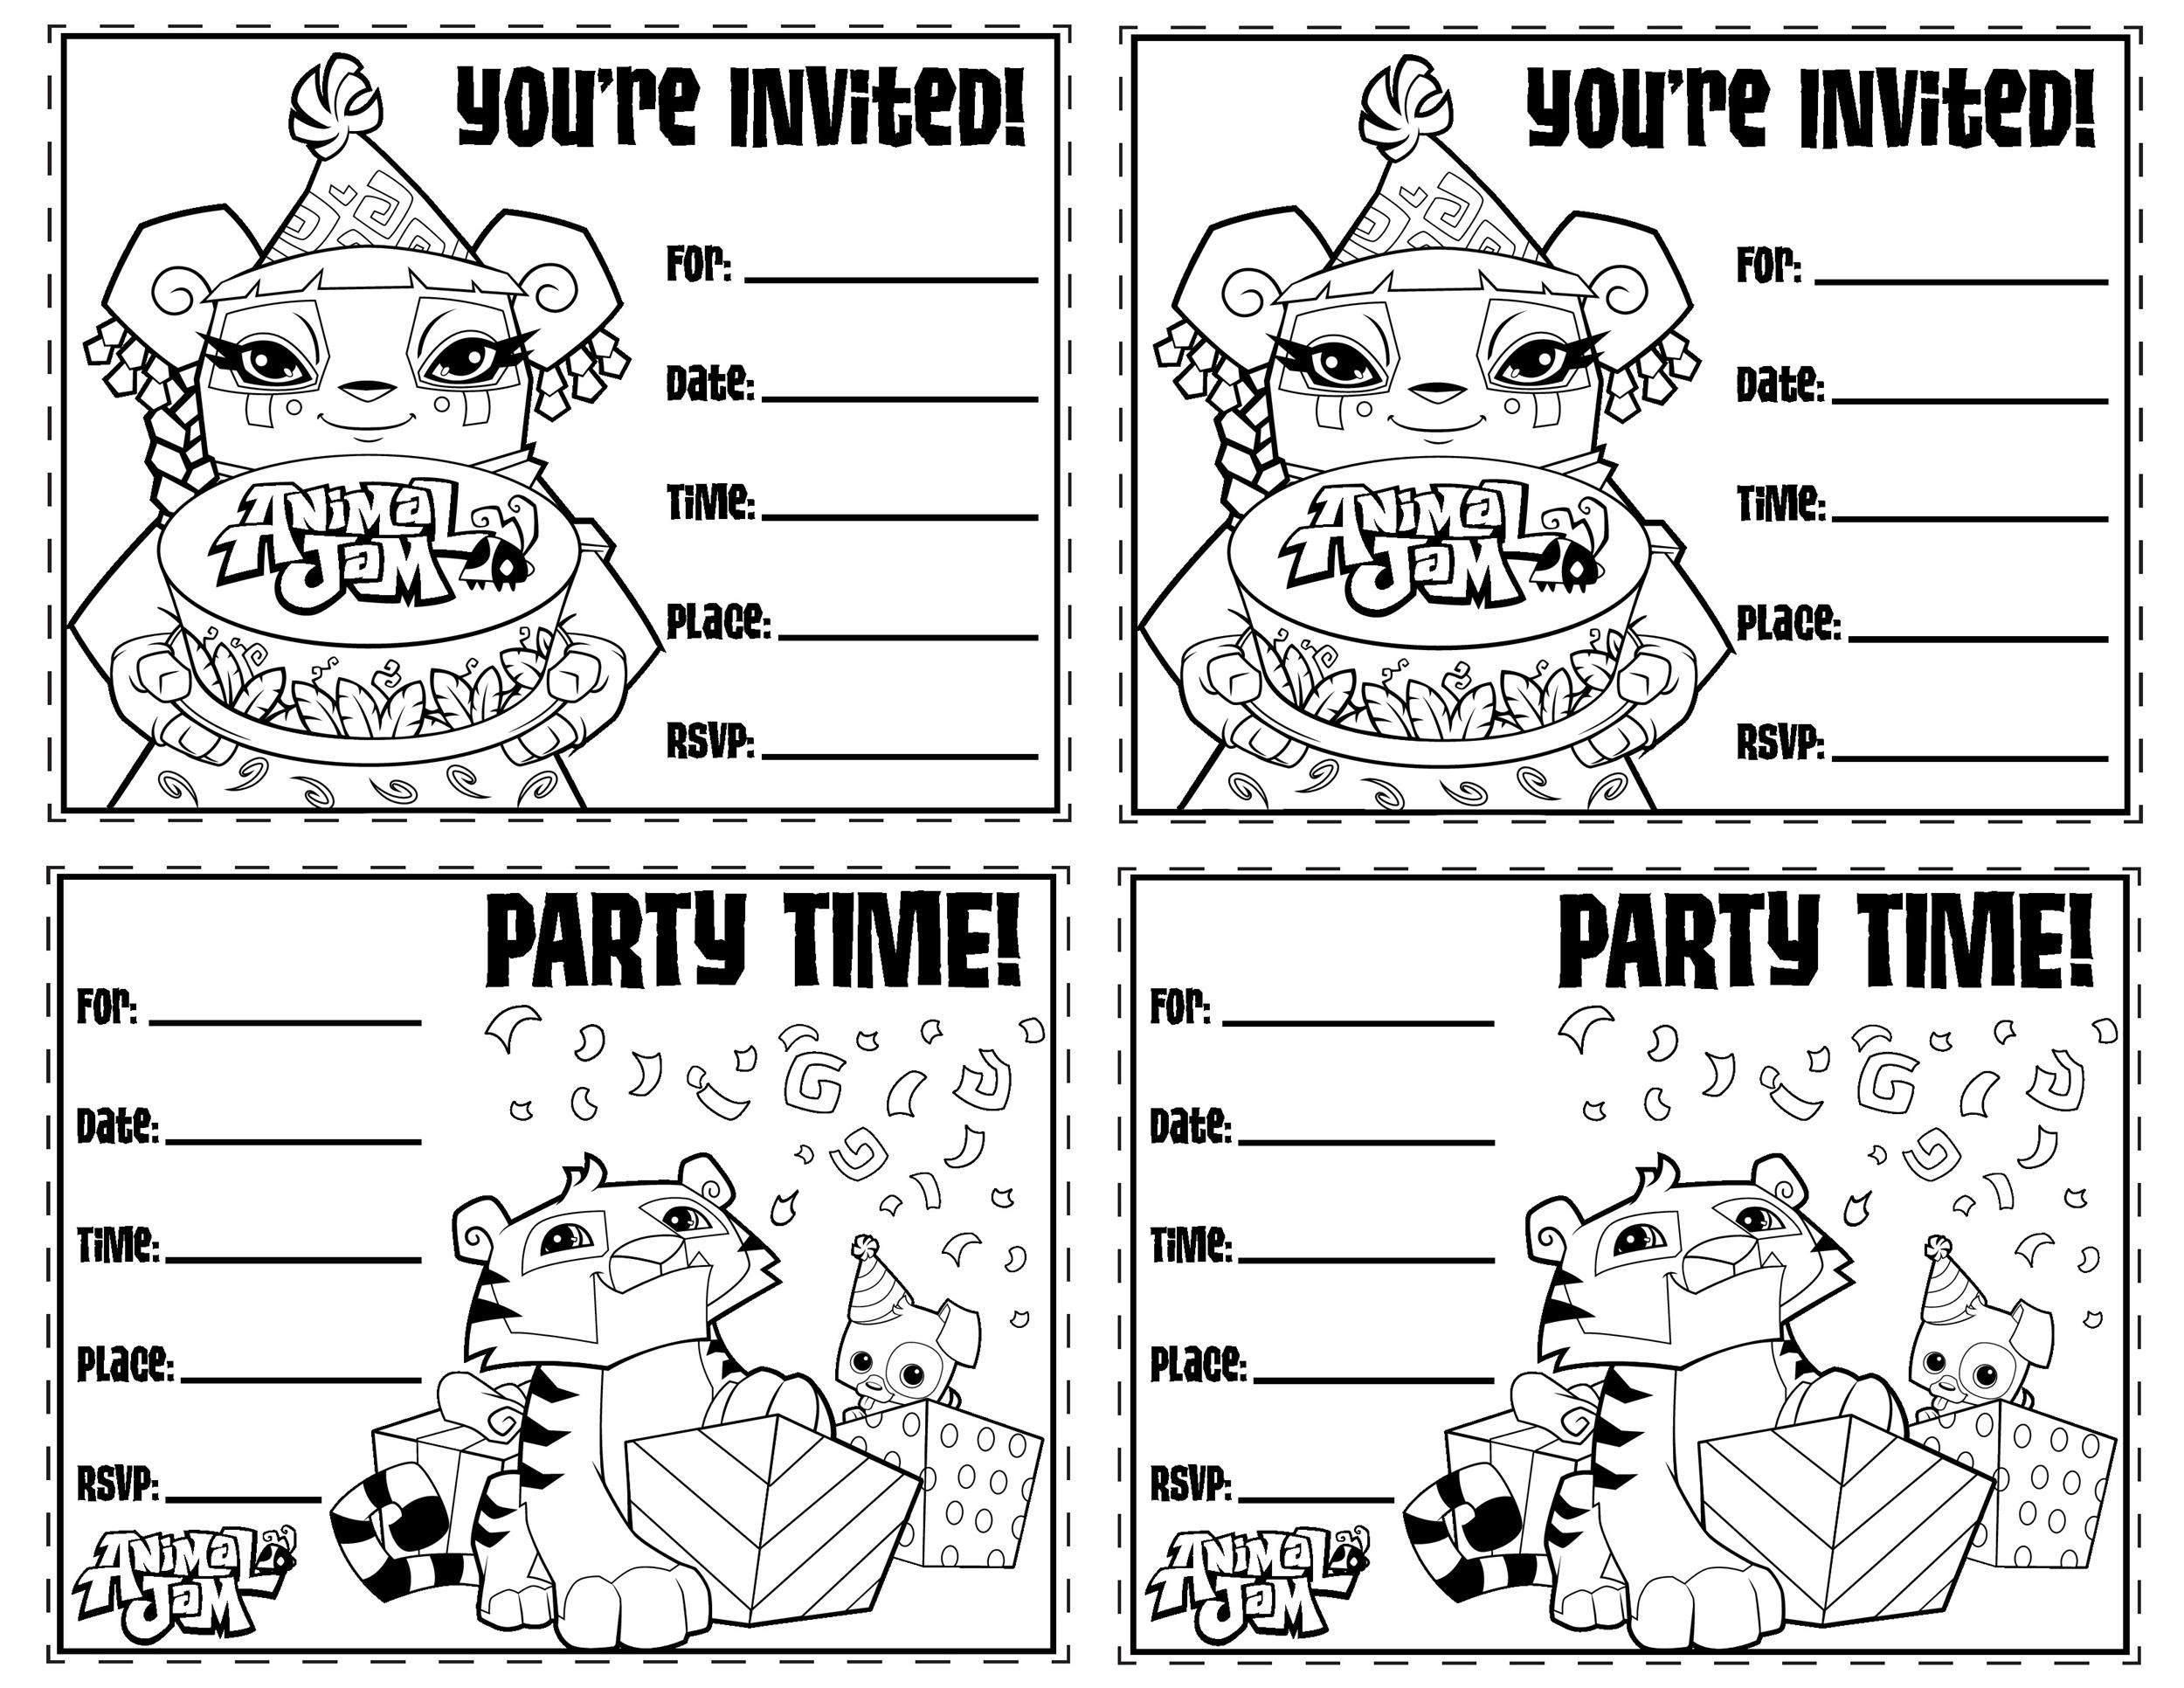 free-birthday-invitation-templates-for-kids-master-template